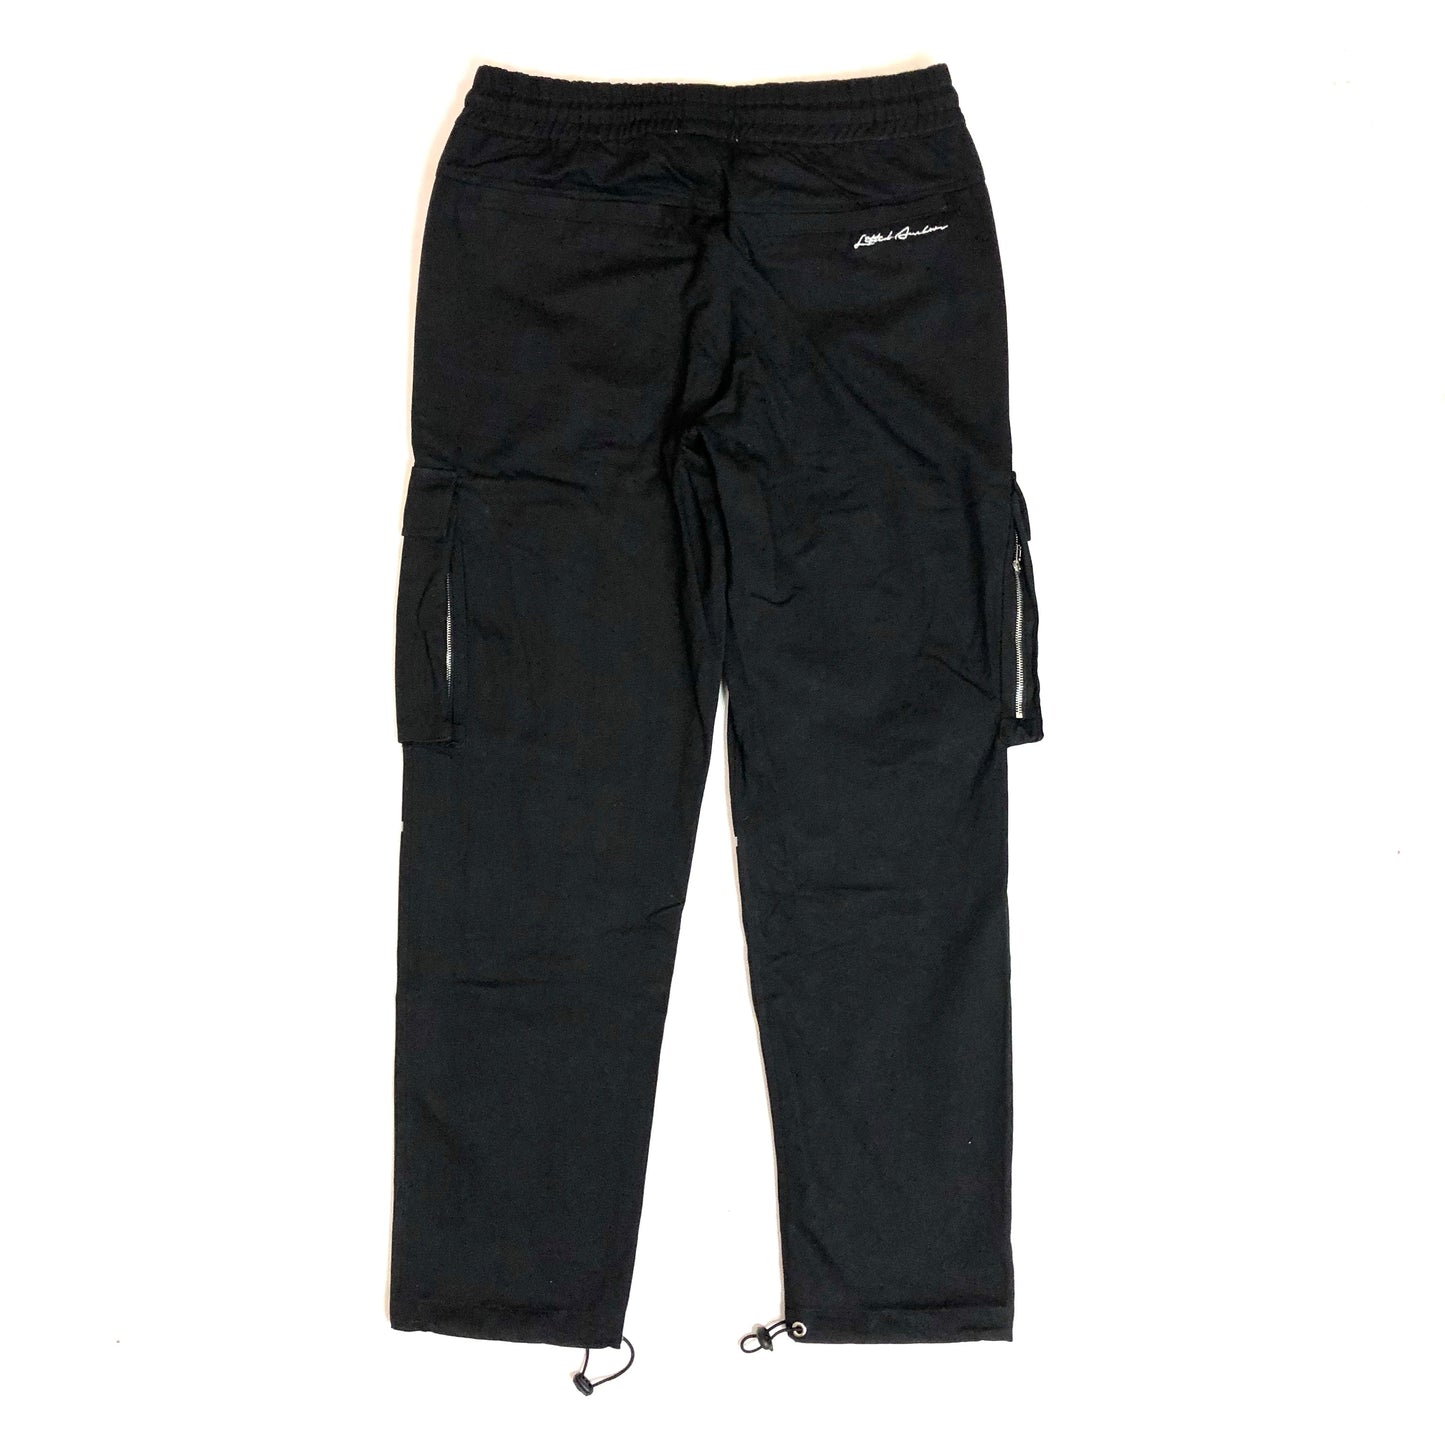 LIFTED ANCHORS/YORKE CARGO PANTS